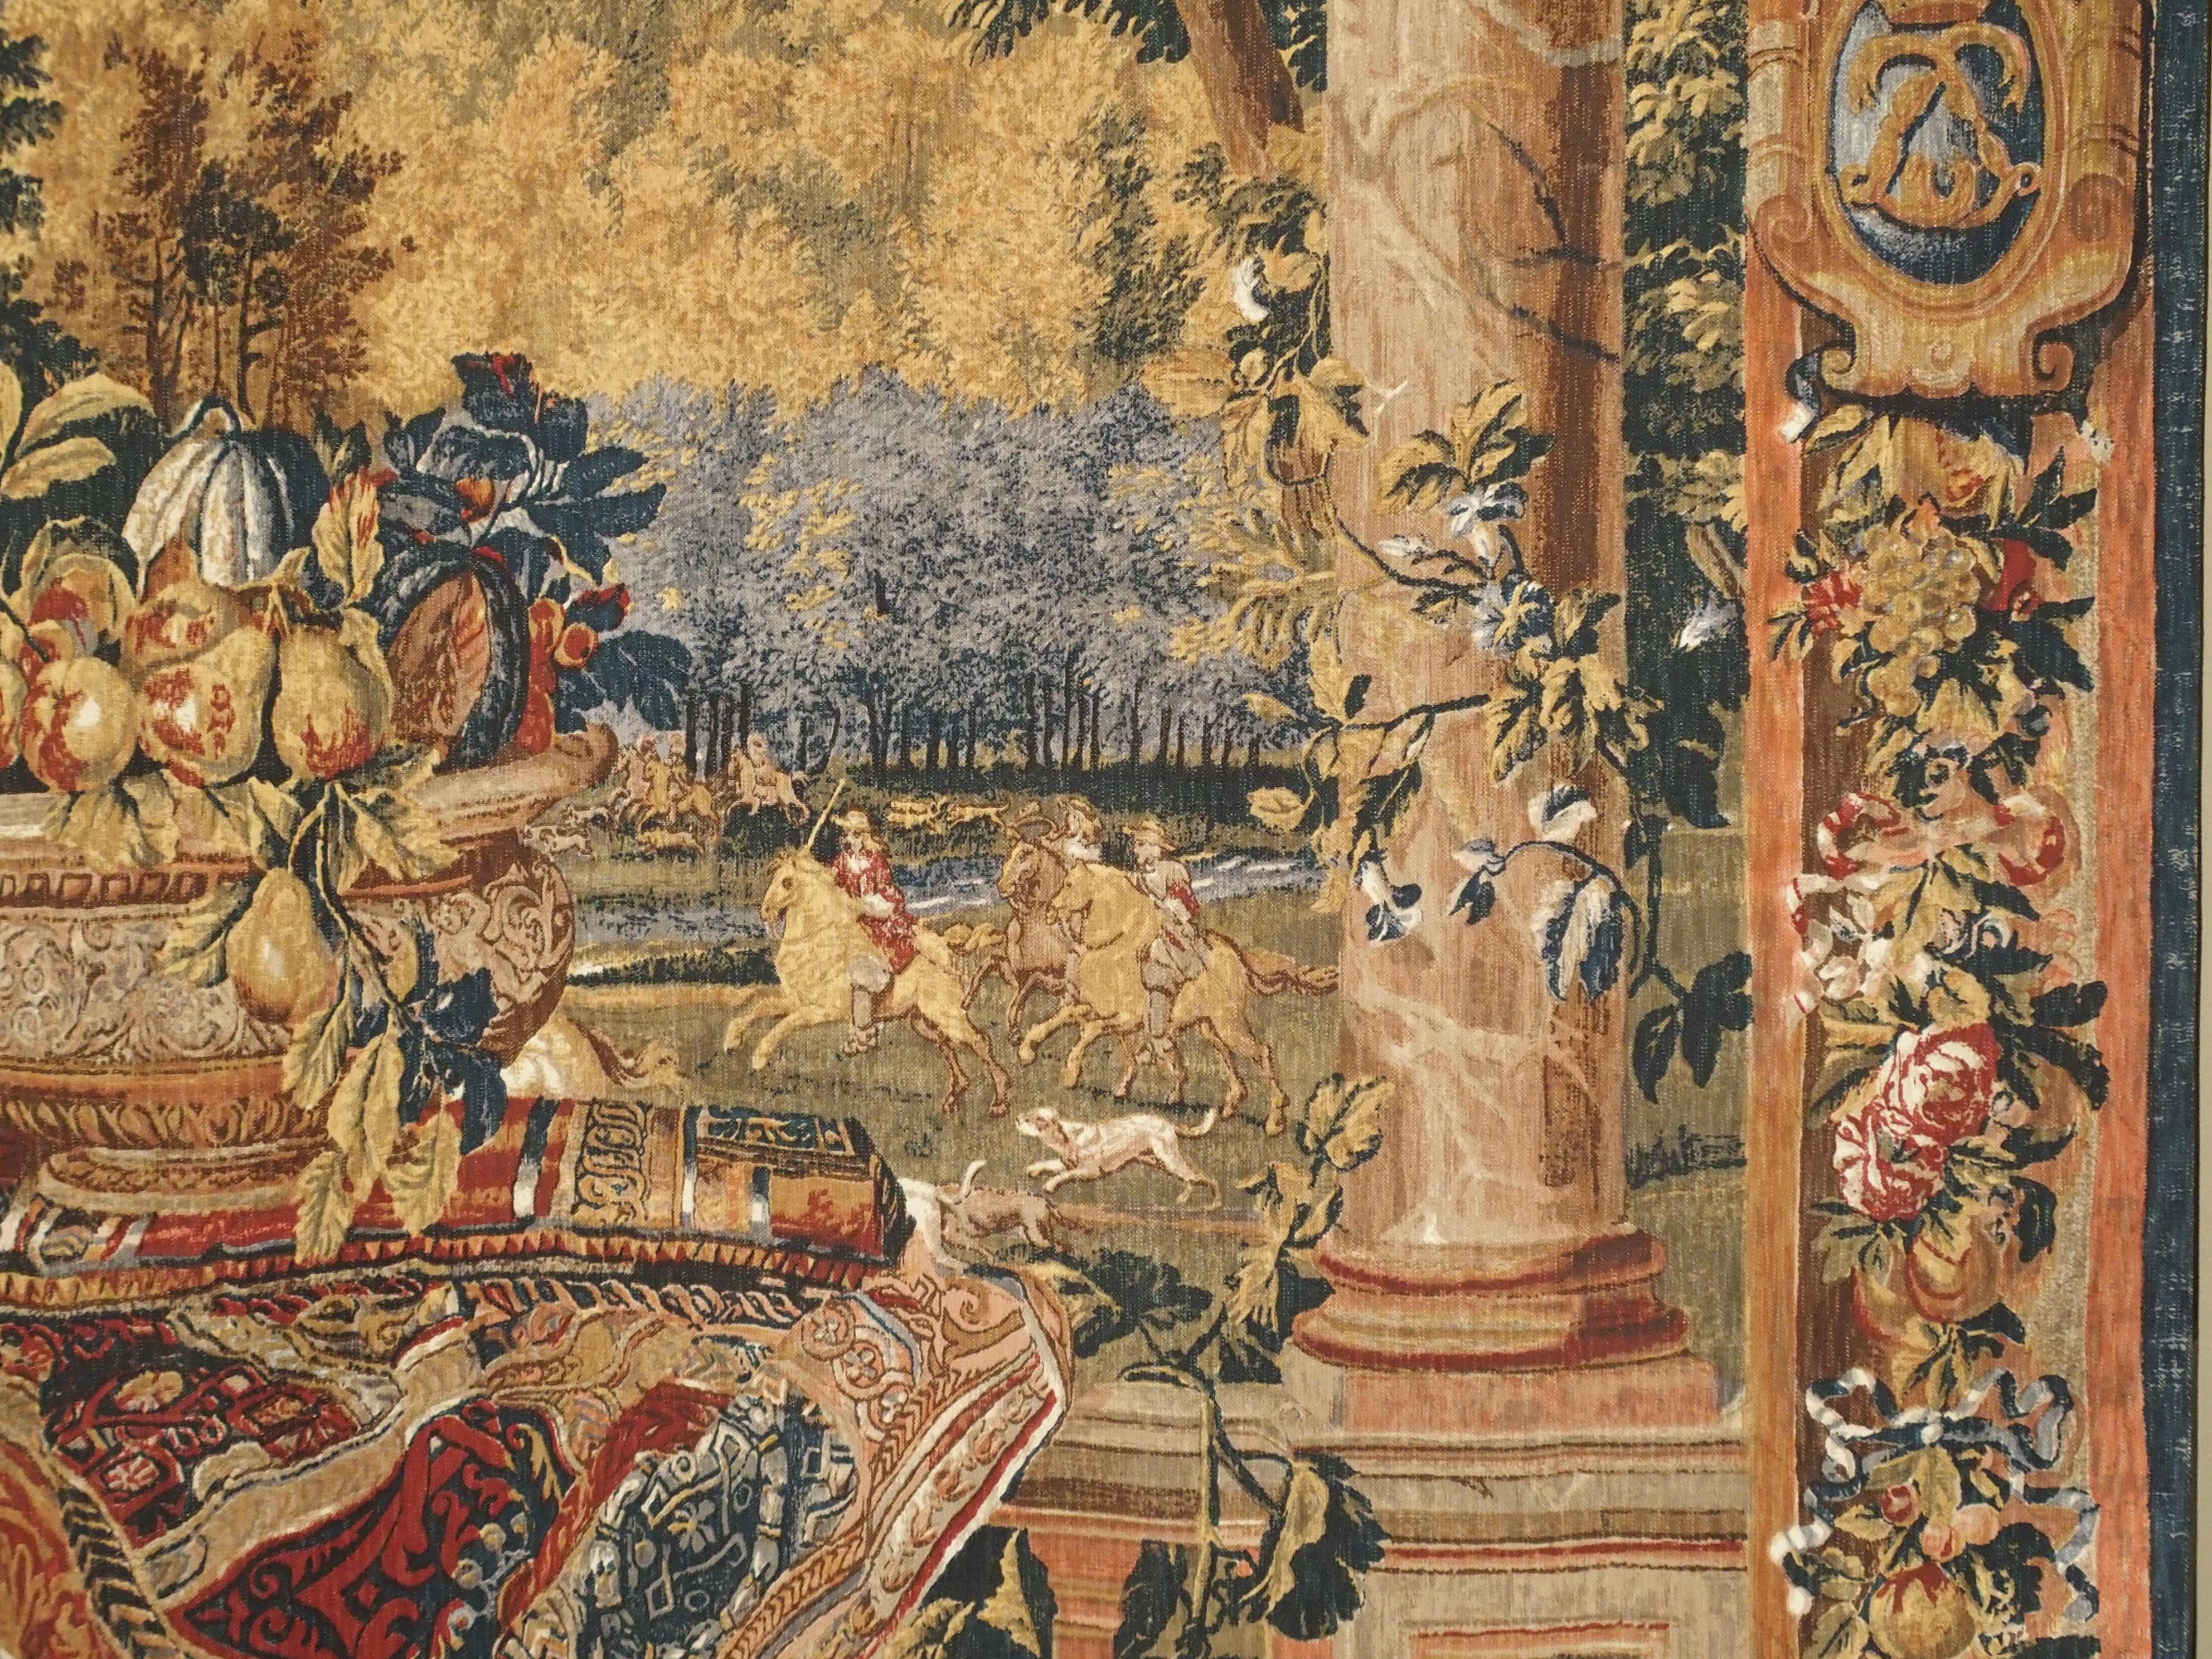 Based on 17th century original. From Italy, formerly Rambouillet. The Royal houses of King Louis XIV (Copy of 1 of 12 originals).

Chateau de Versailles tapestry is from the series of the original tapestries depicting French Royal palaces, and